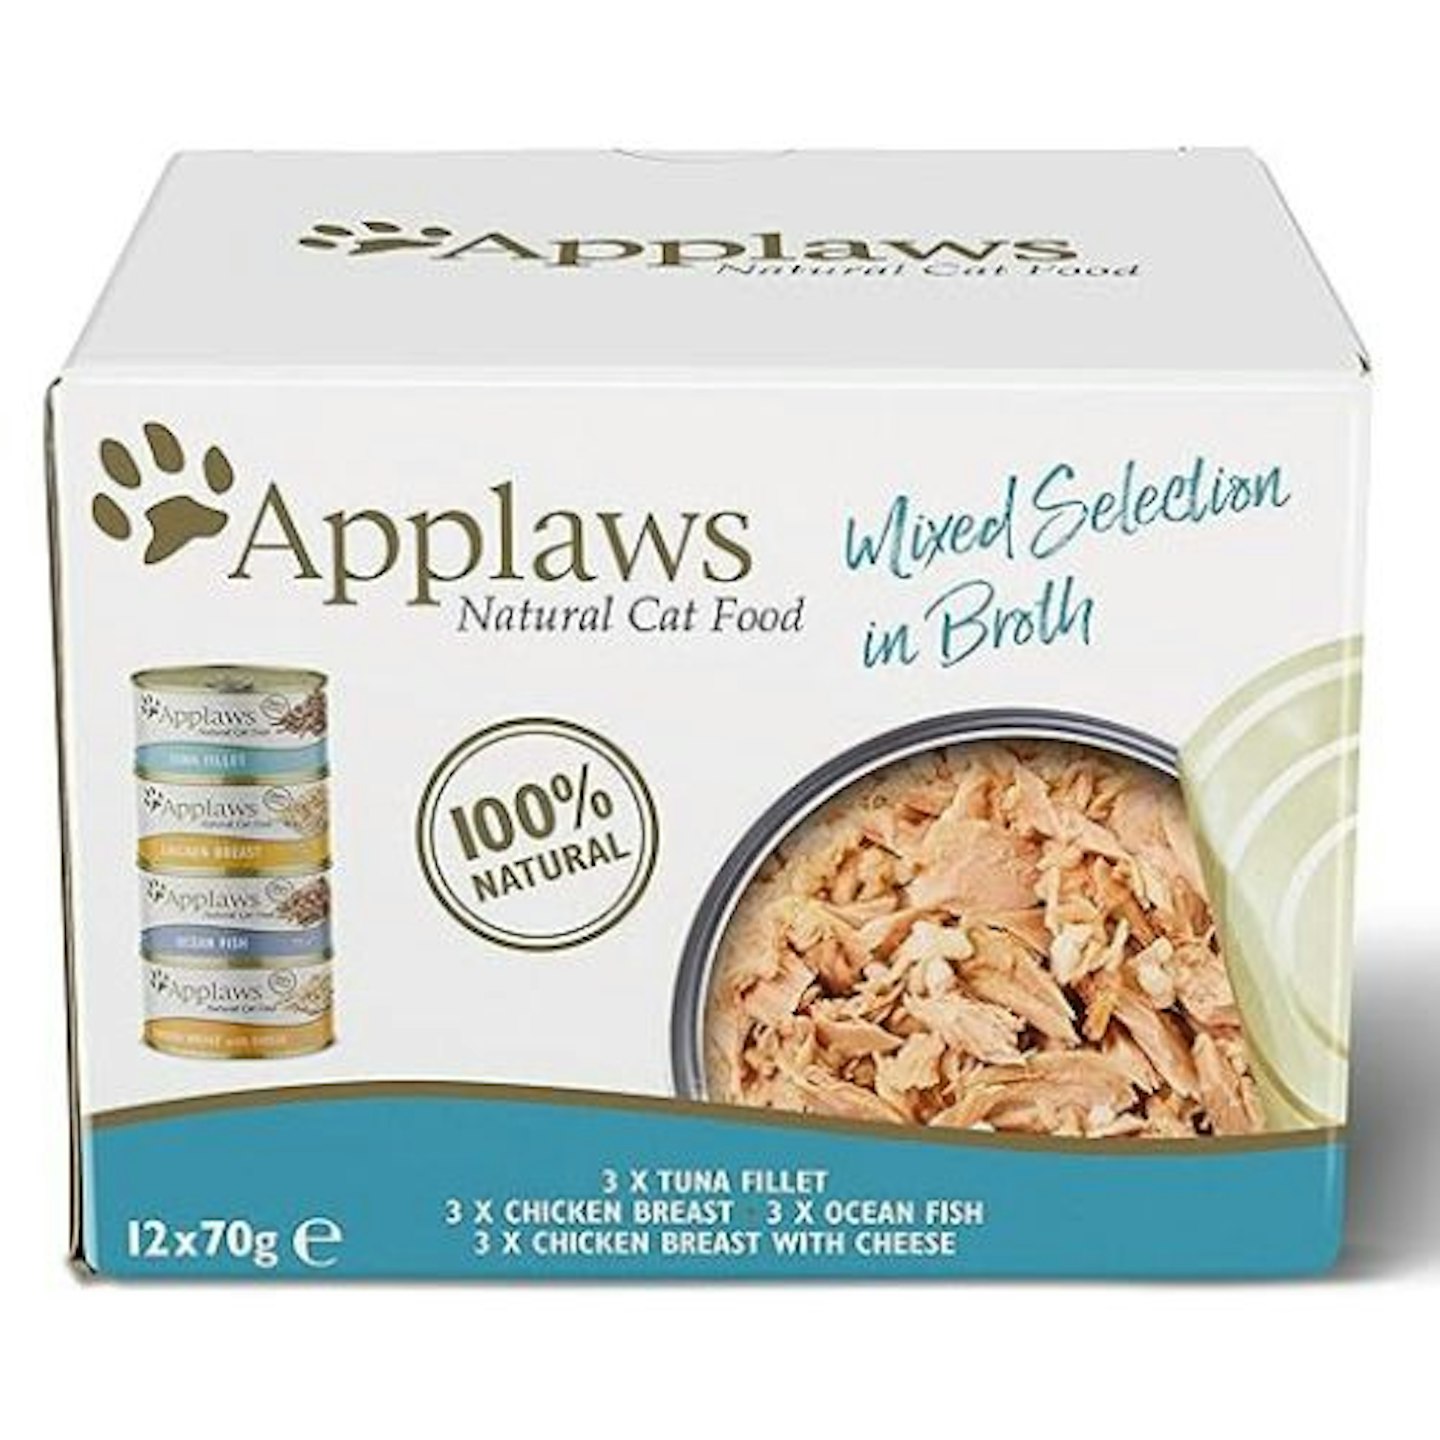 Applaws Natural Wet Cat Food, Chicken and Fish in Broth